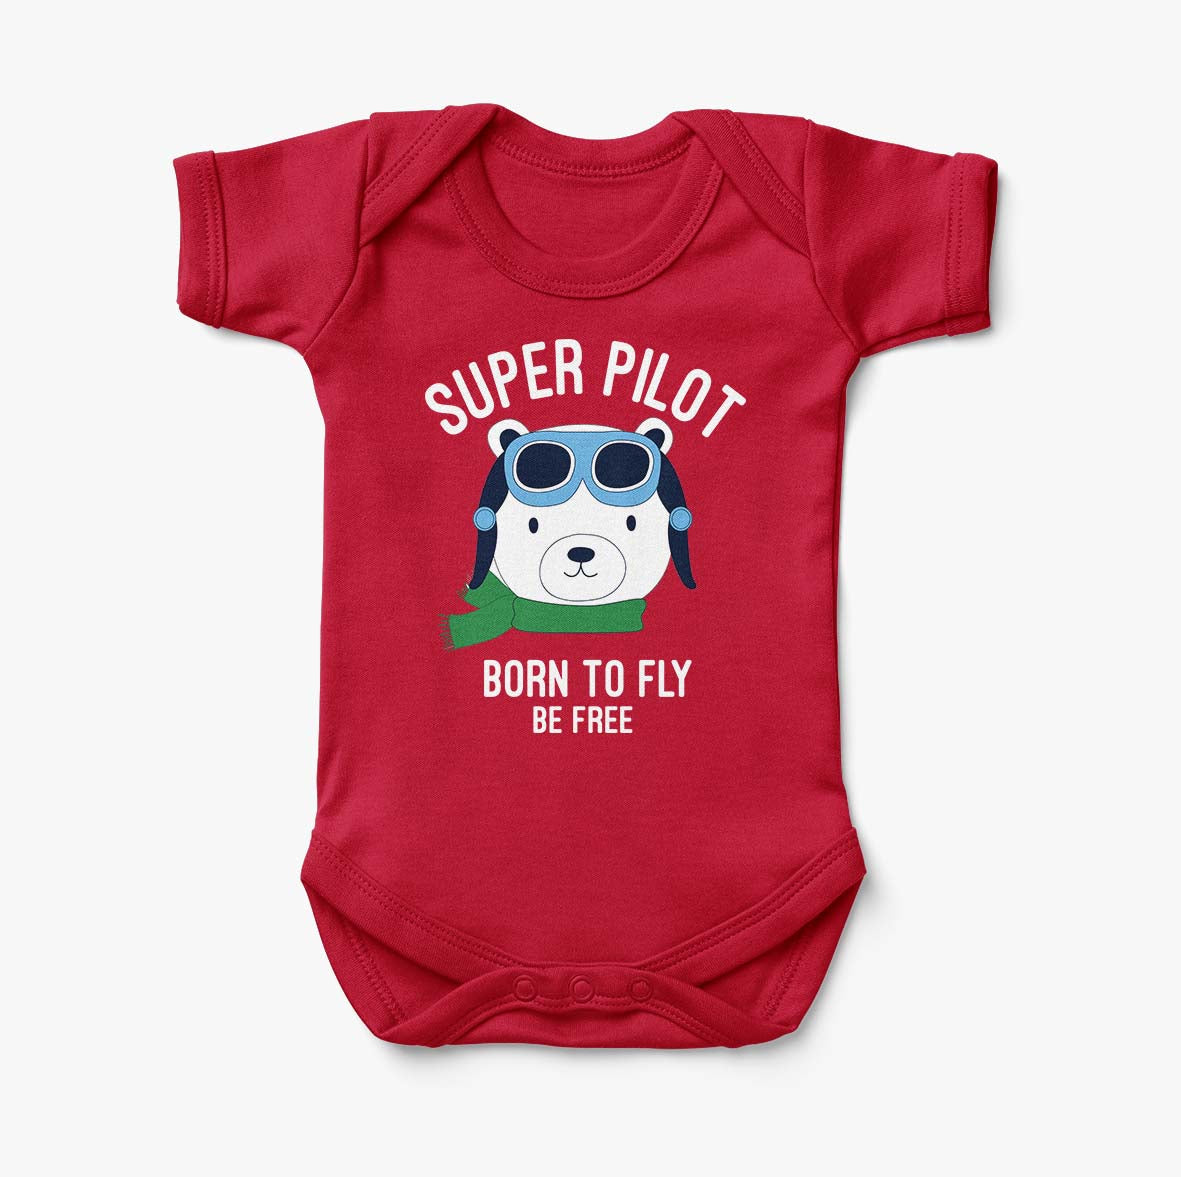 Super Pilot - Born To Fly Designed Baby Bodysuits